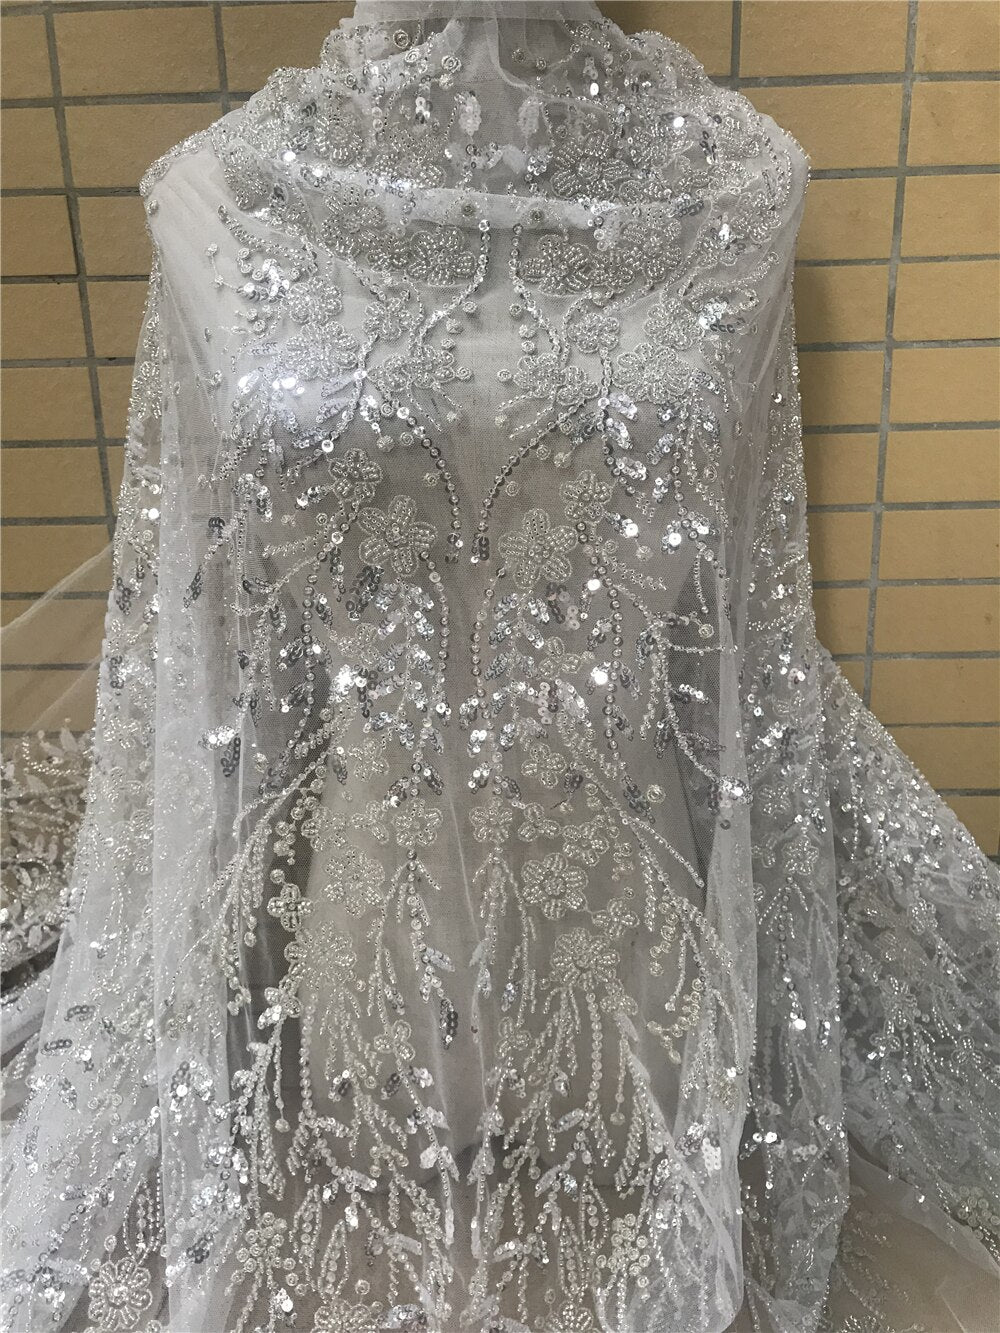 5 YARDS / Francesca Beige Regal Design Sequin Beaded Embroidery Tulle Mesh Lace Party Prom Bridal Dress Fabric